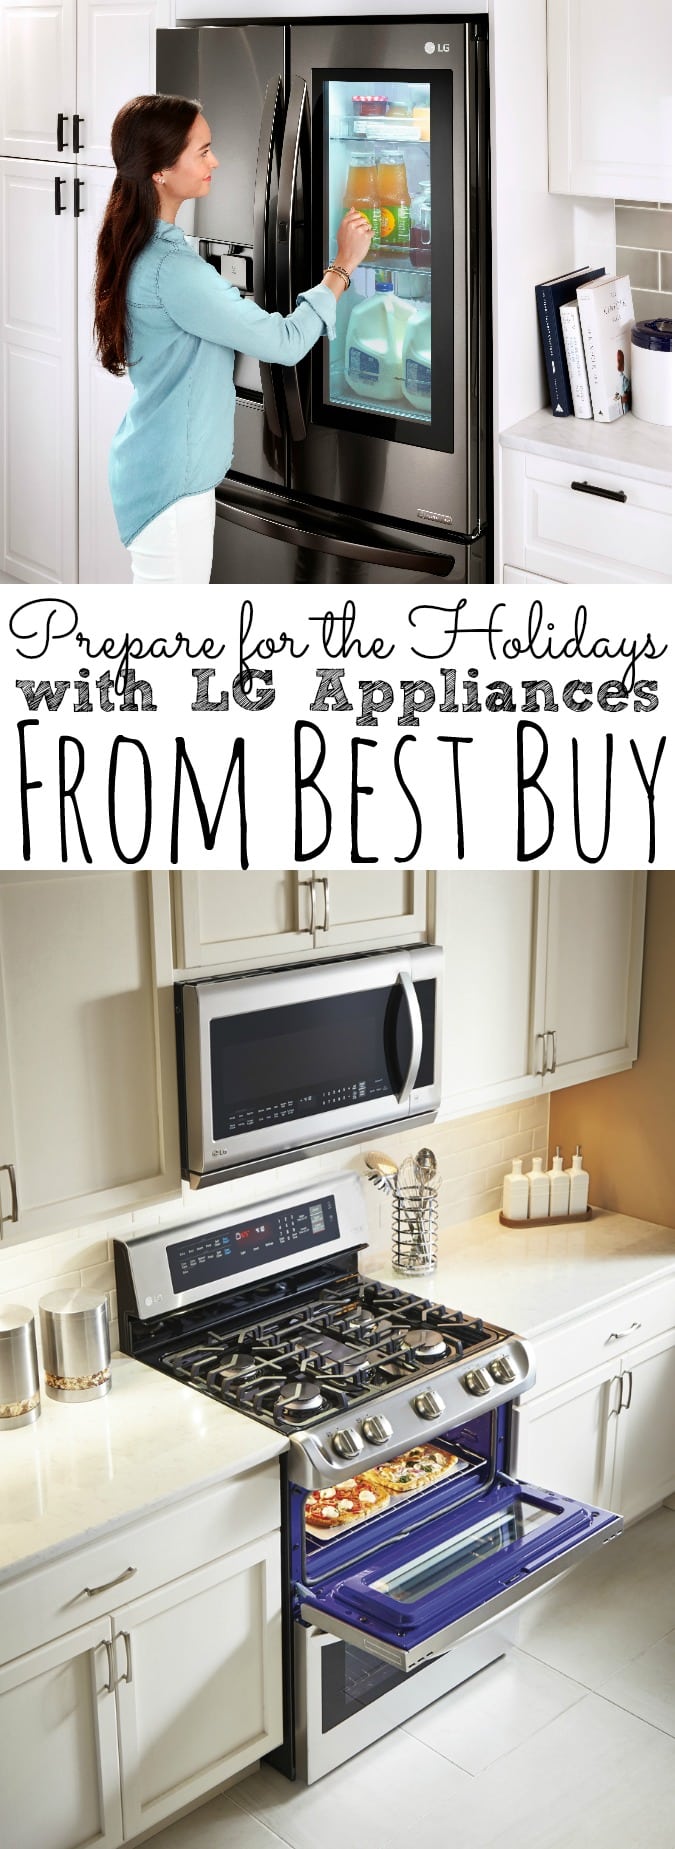 Prepare For The Holidays With LG Appliances - simplytodaylife.com